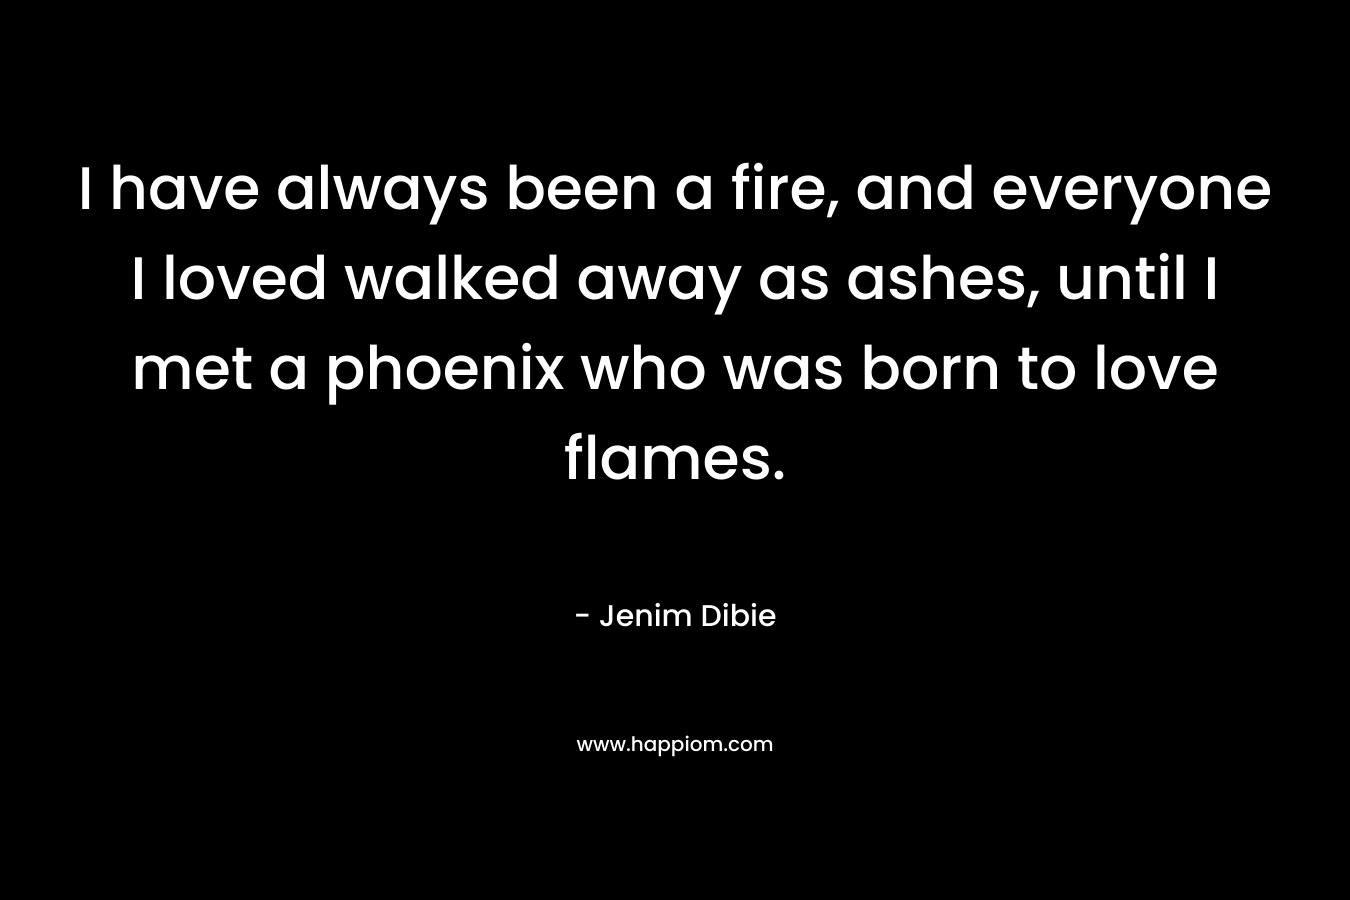 I have always been a fire, and everyone I loved walked away as ashes, until I met a phoenix who was born to love flames.